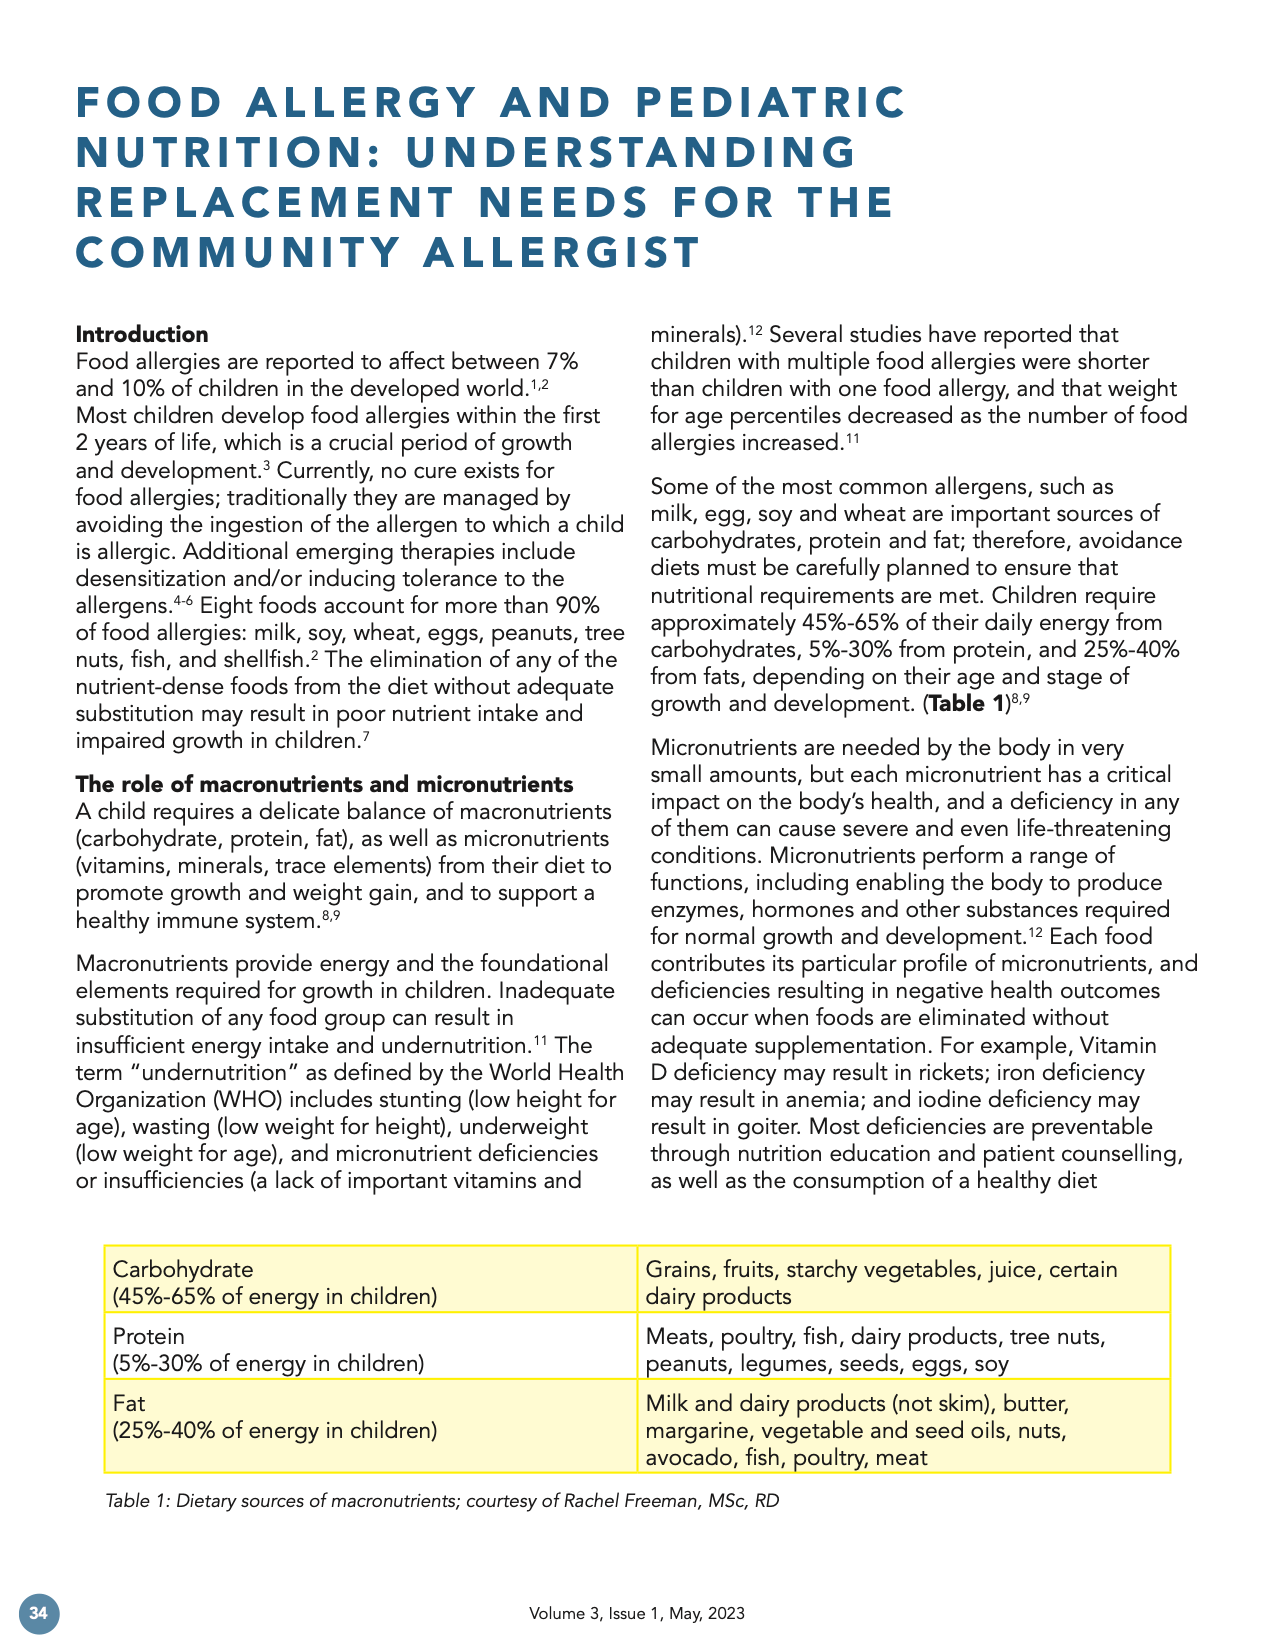 Food Allergy and Pediatric Nutrition: Understanding Replacement Needs for the Community Allergist.